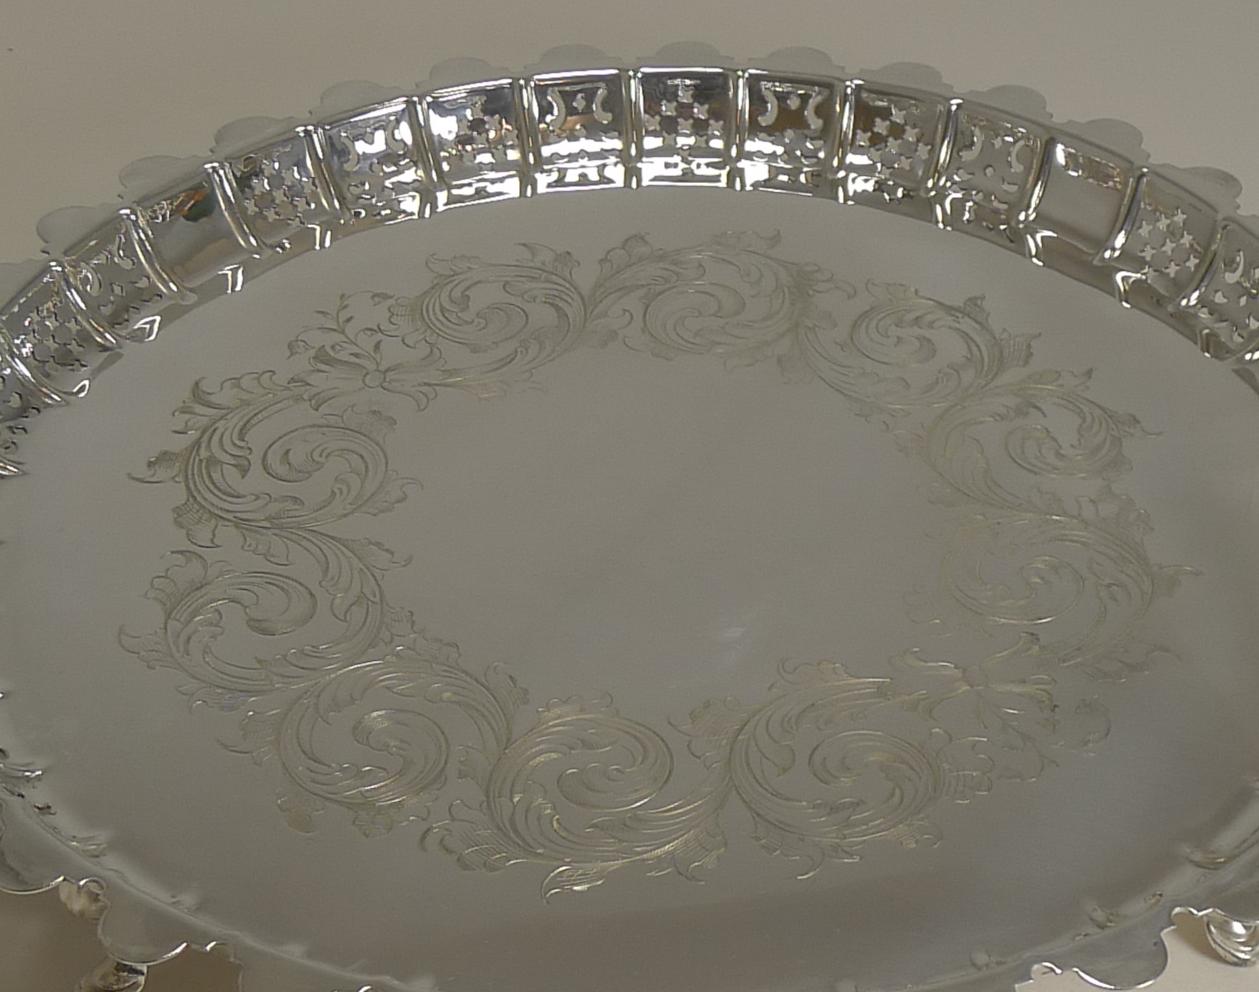 A fine early Victorian circular tray or salver made from silver plate with full marks on the underside for Henry Wilkinson and Co. together with their crossed keys mark.

It is also lucky enough to have an English design registration diamond